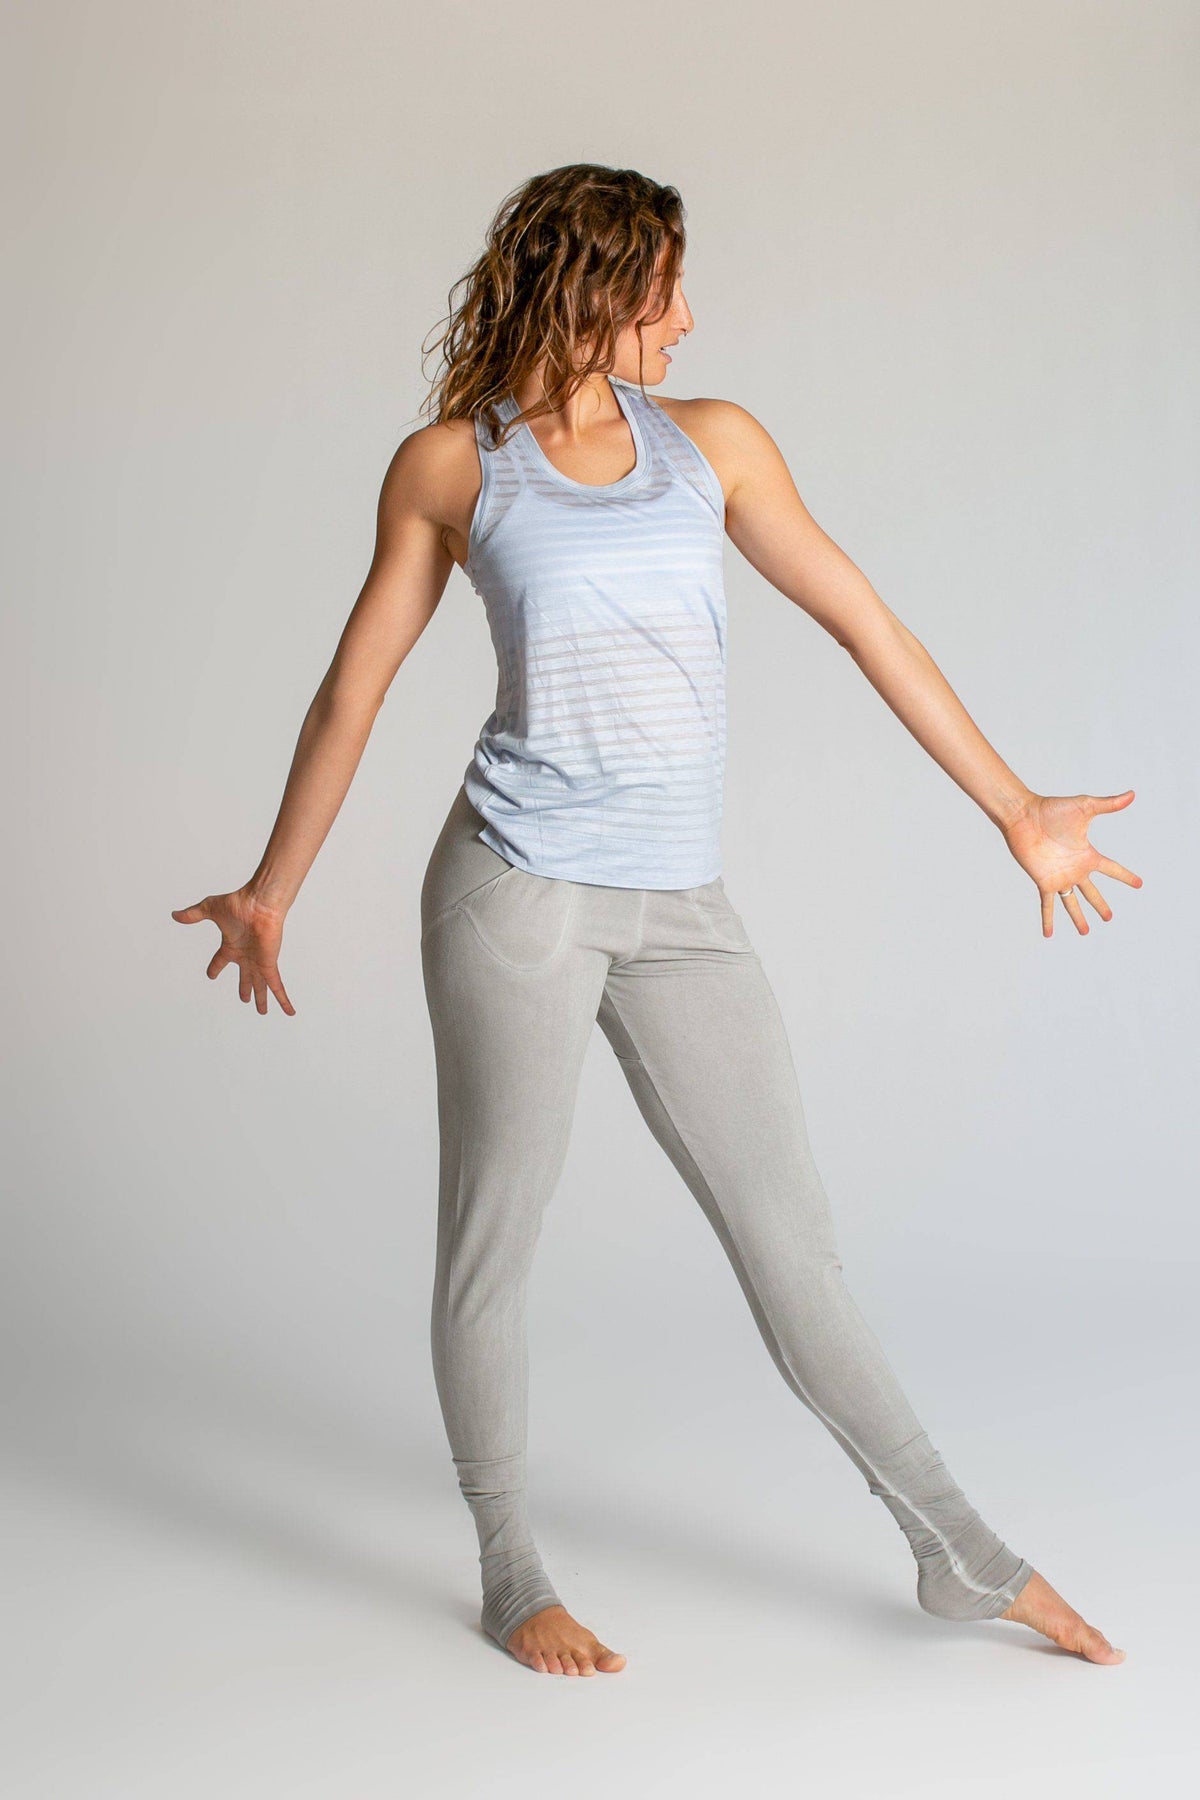 Limited Edition Striped Viscose Racer Back Tank Top - womens clothing - Ripple Yoga Wear